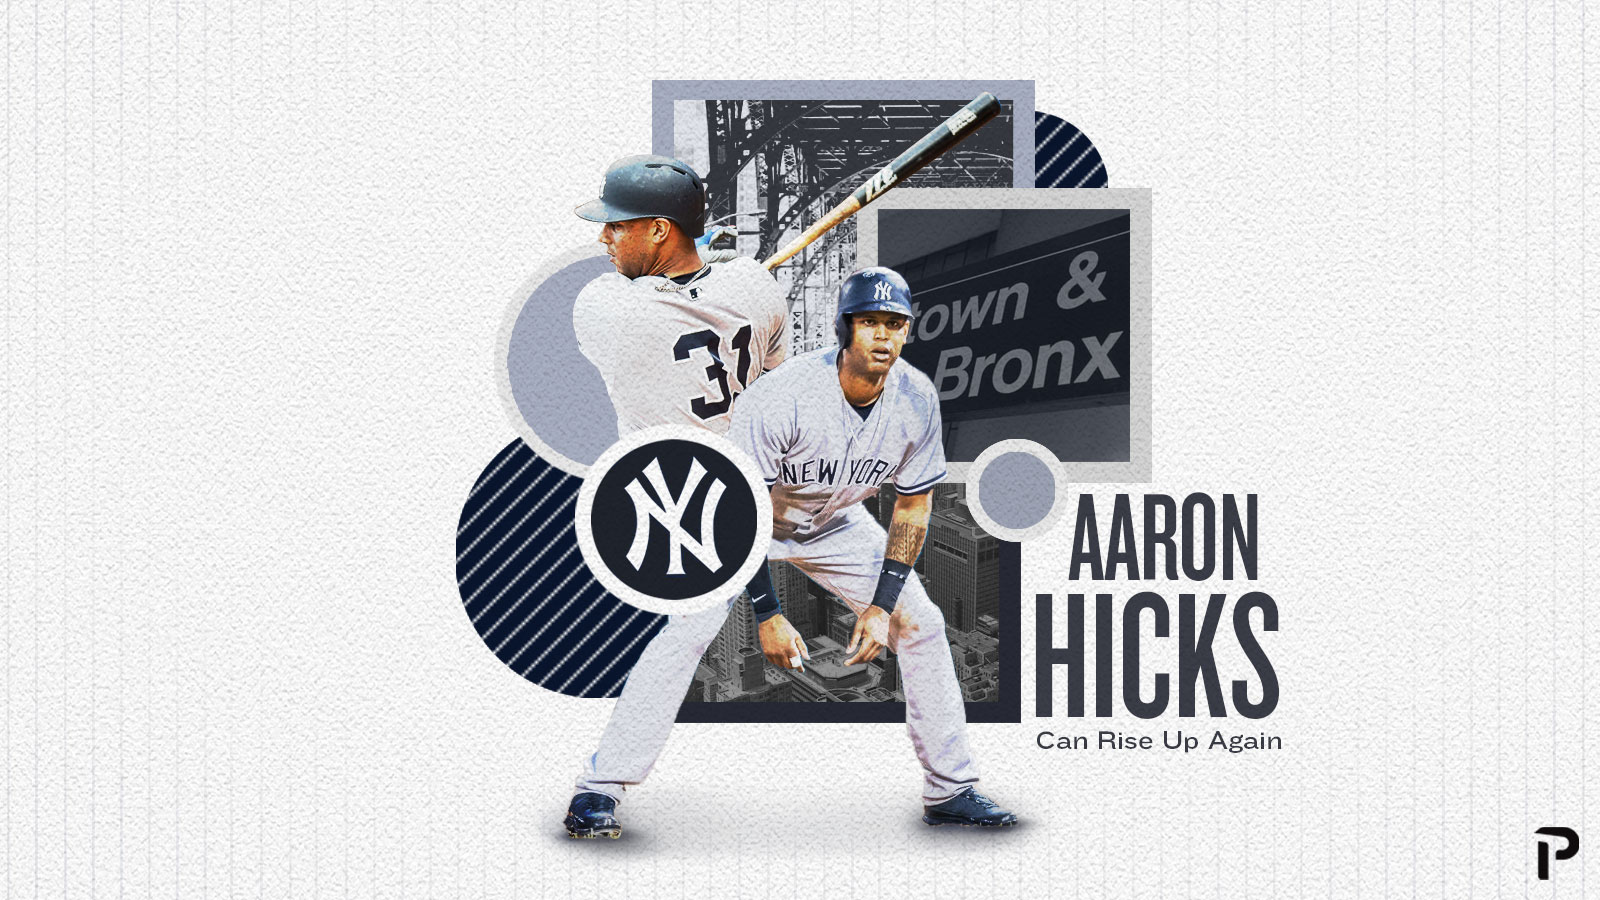 Aaron Hicks Can Rise Up Again